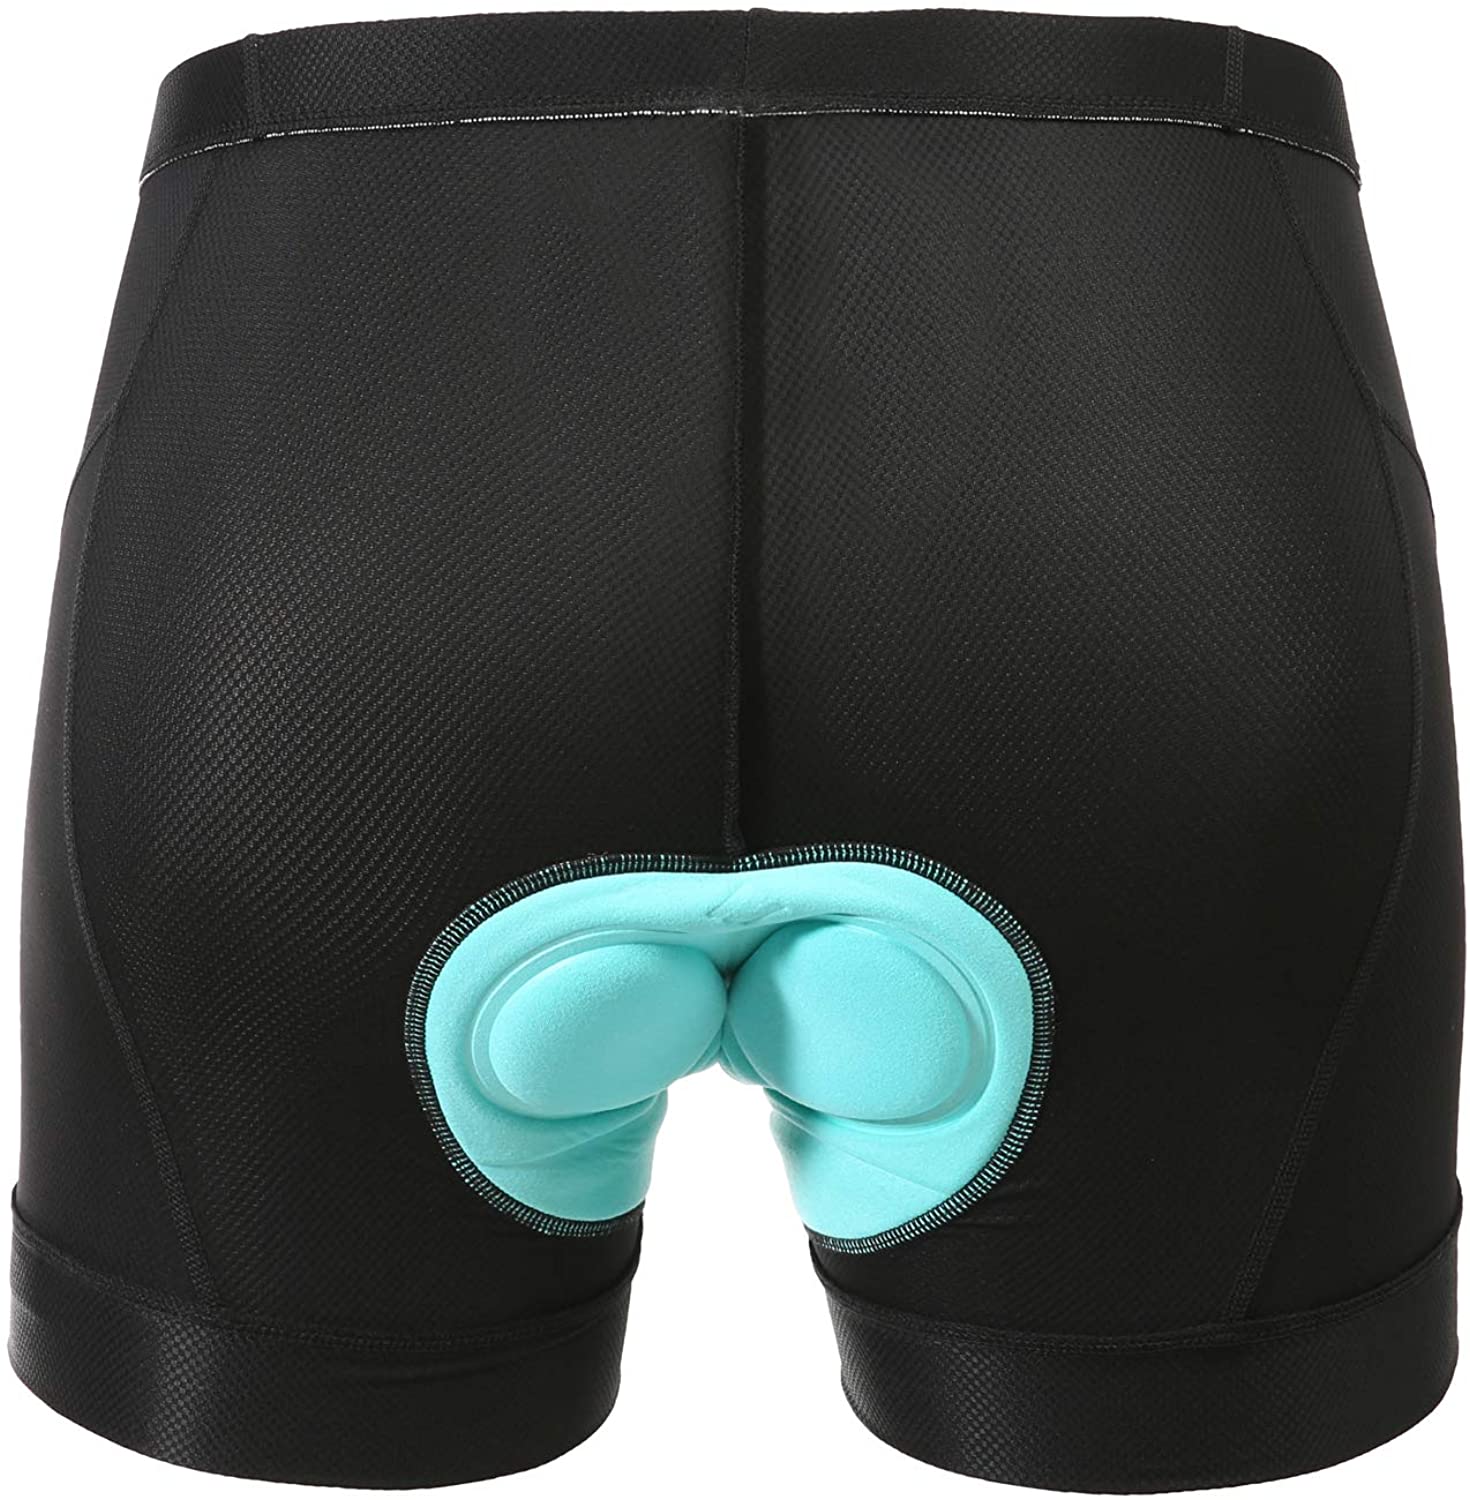 3D Padded Men Women Cycling Underwear Bicycle Riding Shorts Pants Breathable 